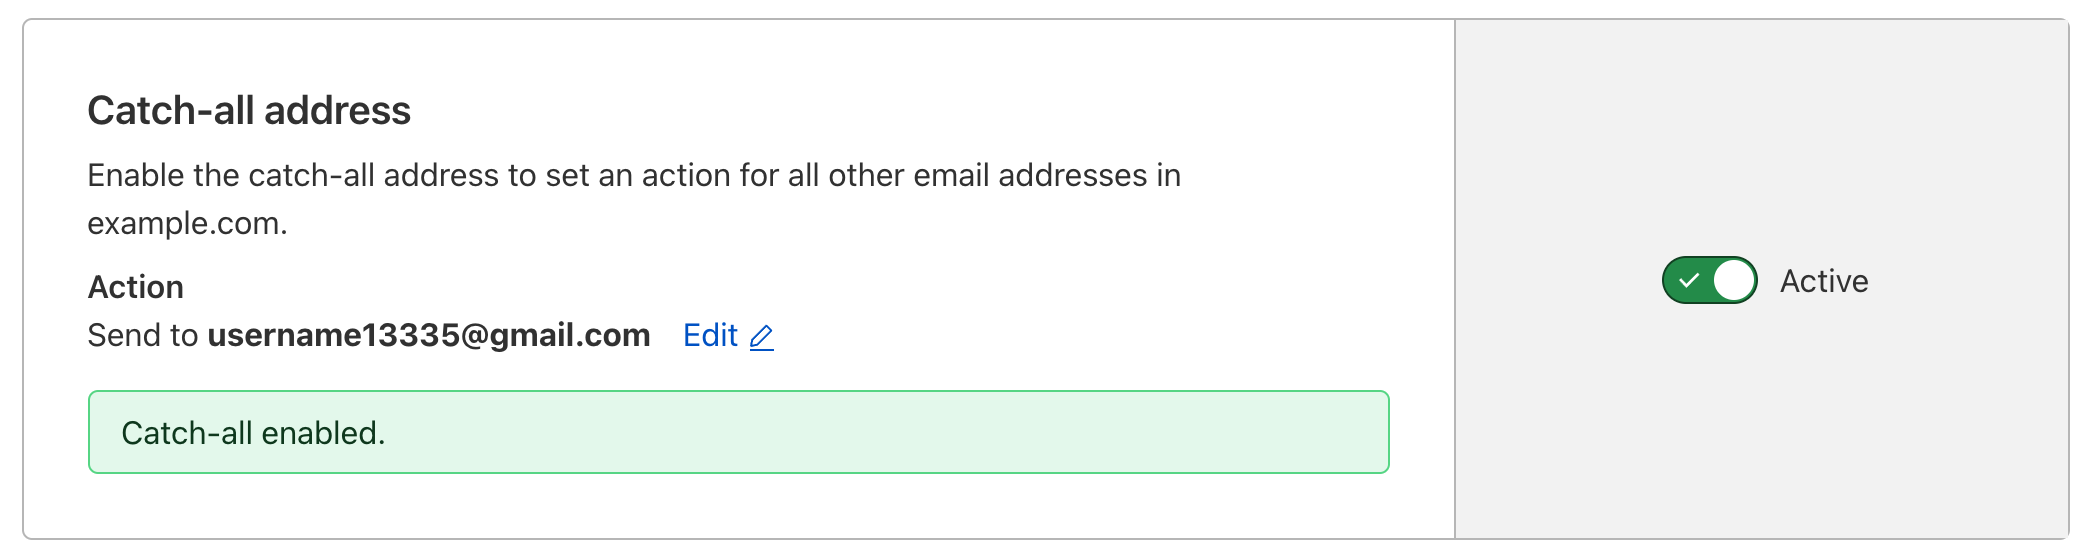 Migrating to Cloudflare Email Routing